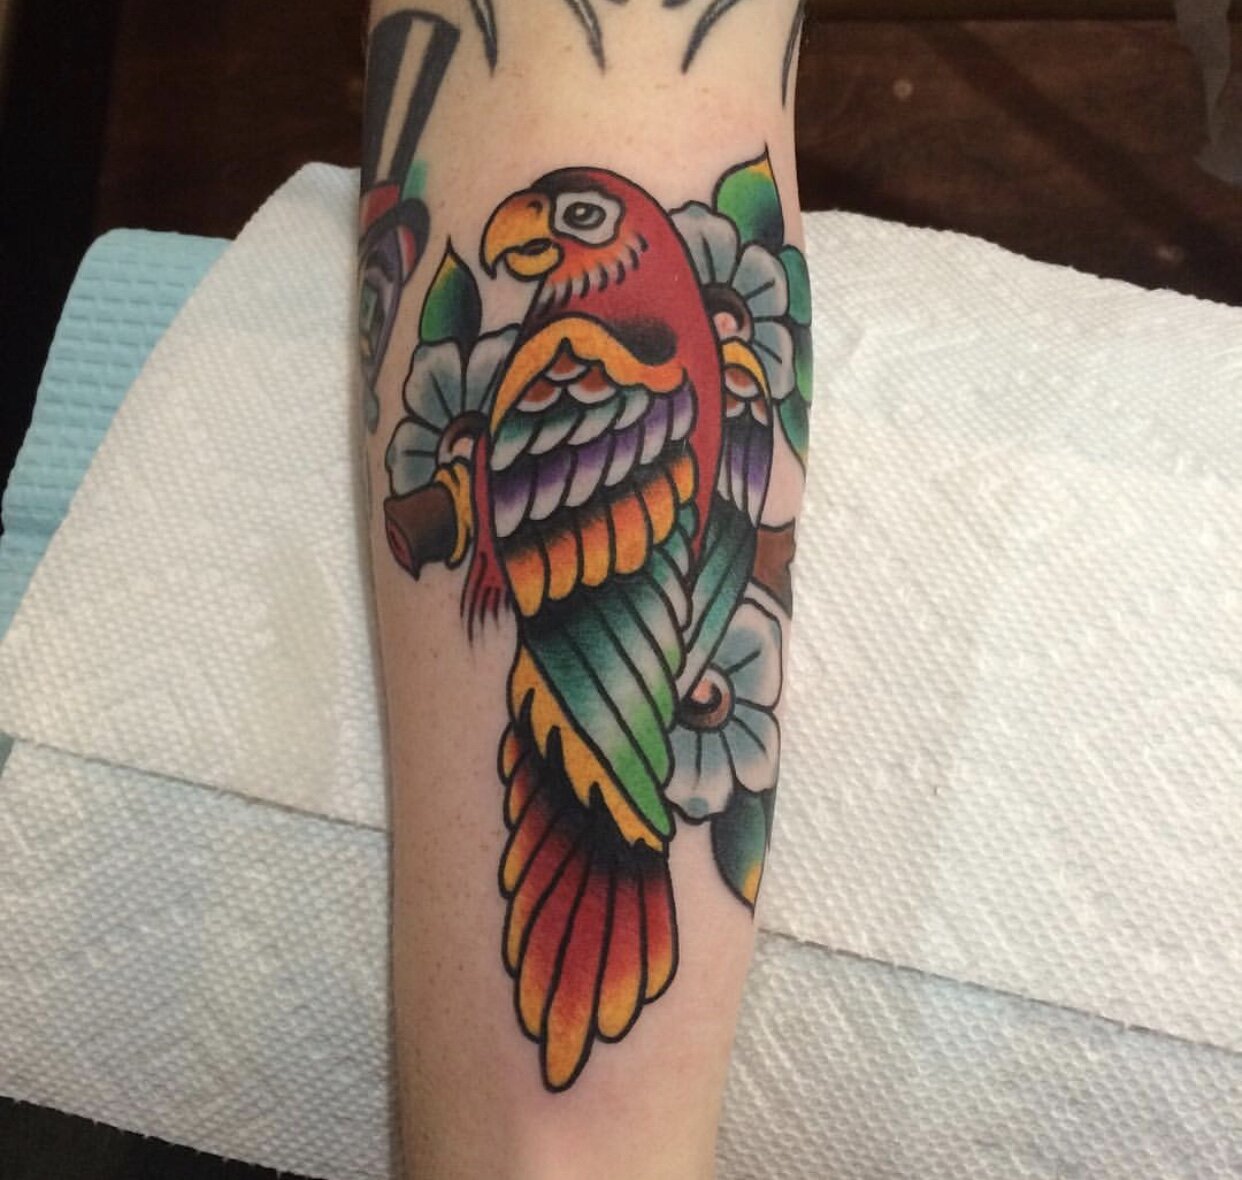 Traditional parrot tattoo in bright color by Andrew Patch at Southern Star Tattoo in Atlanta, Georgia.